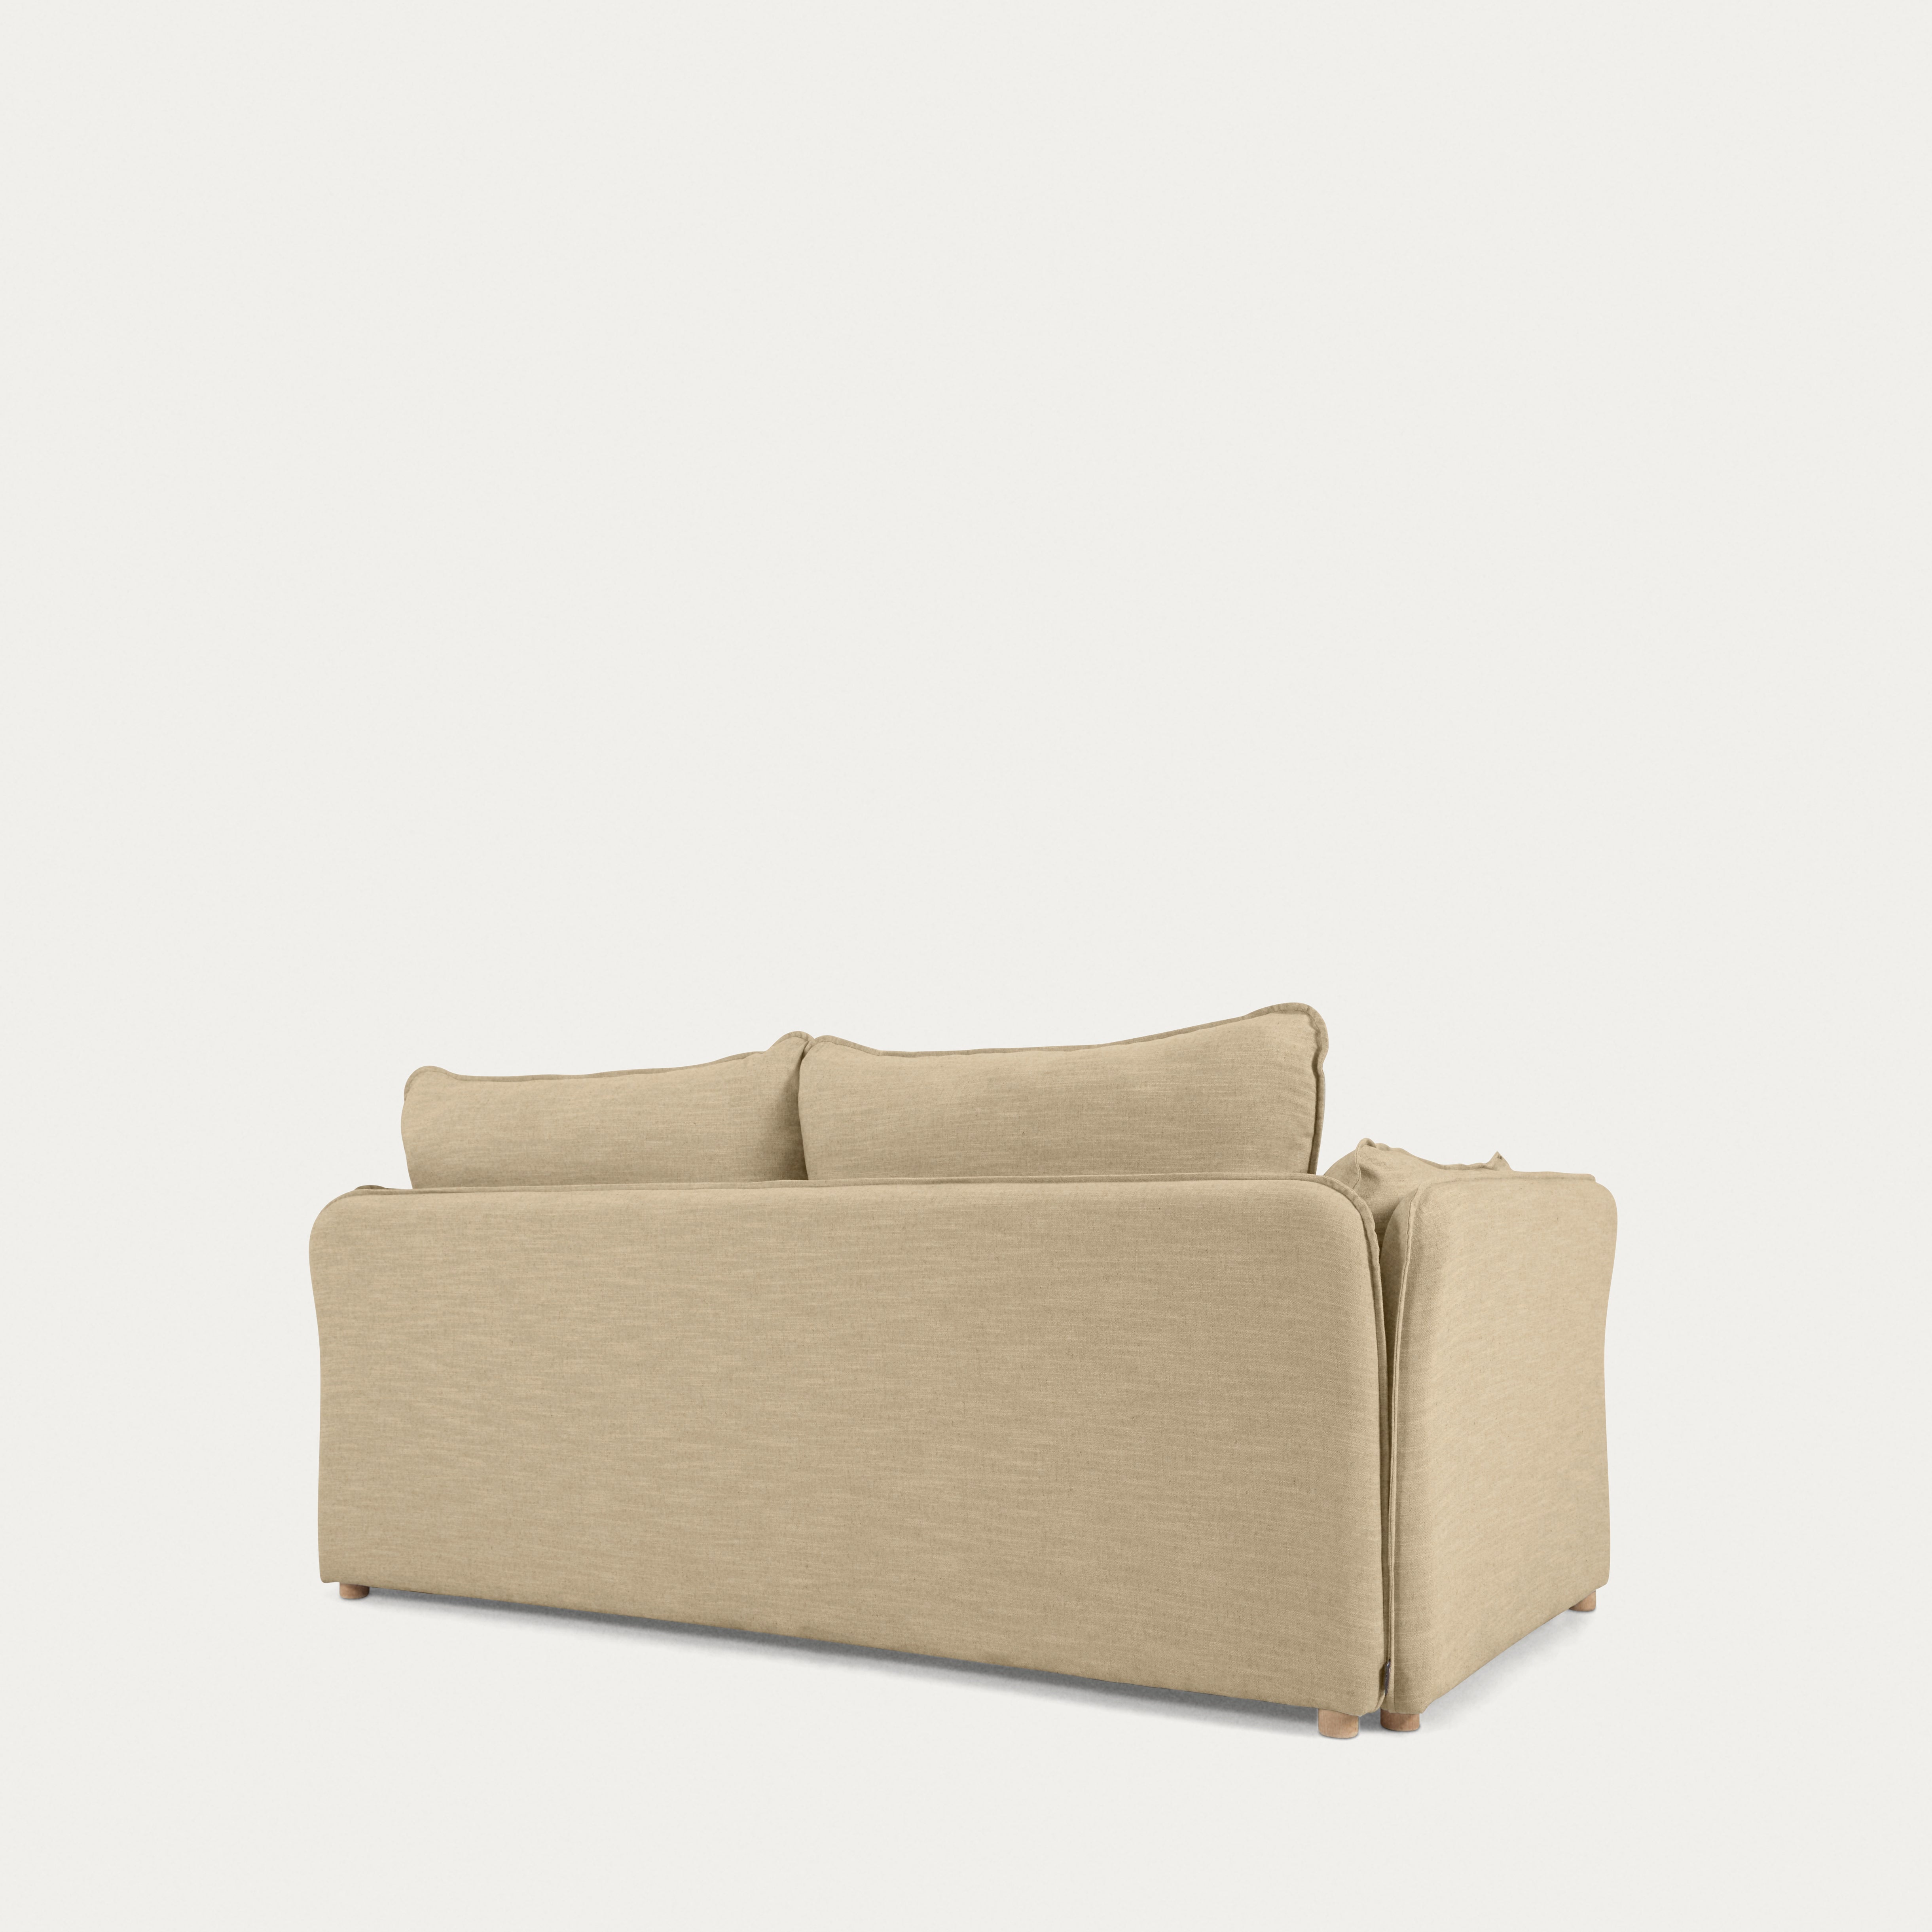 Tanit sofa bed in beige with natural finish solid beech wood legs, 210 cm